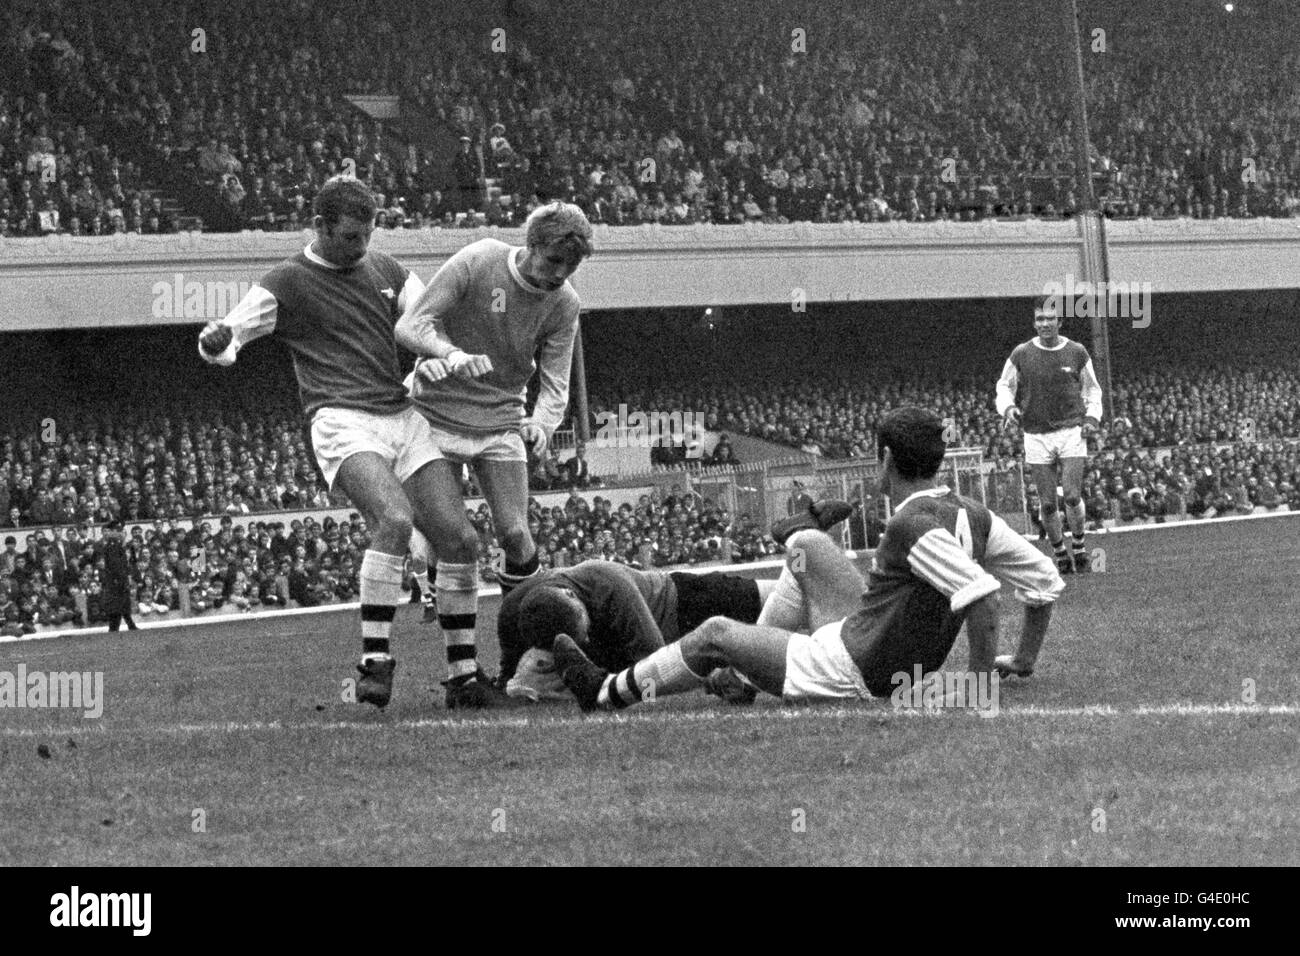 Arsenal goalkeeper Jim Furnell gathers the ball under pressure from teammates Terry Neill (l), Frank McLintock (r) and Manchester City's Colin Bell (c). Stock Photo